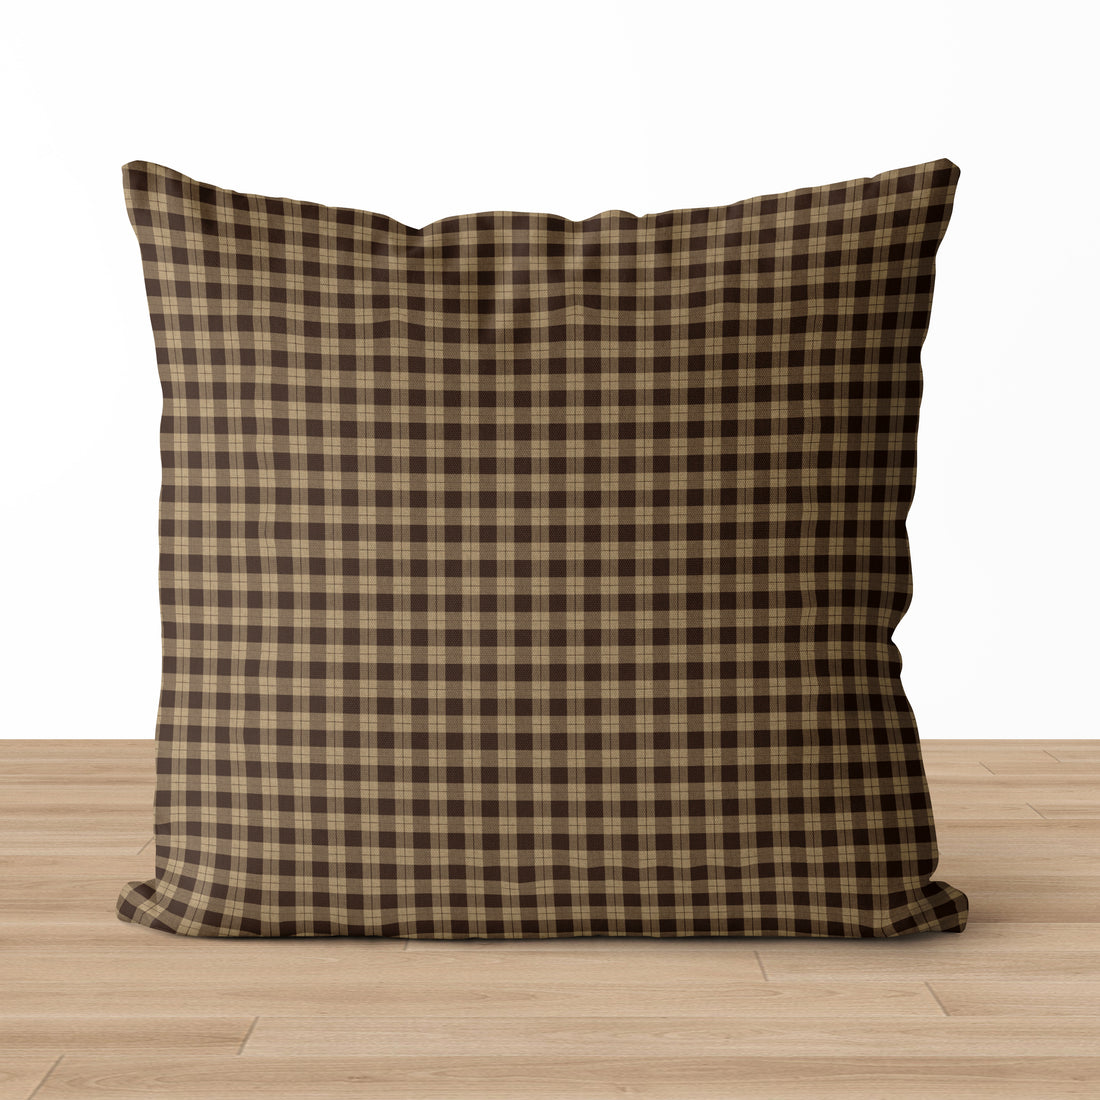 Marlowe Throw Pillow Cover